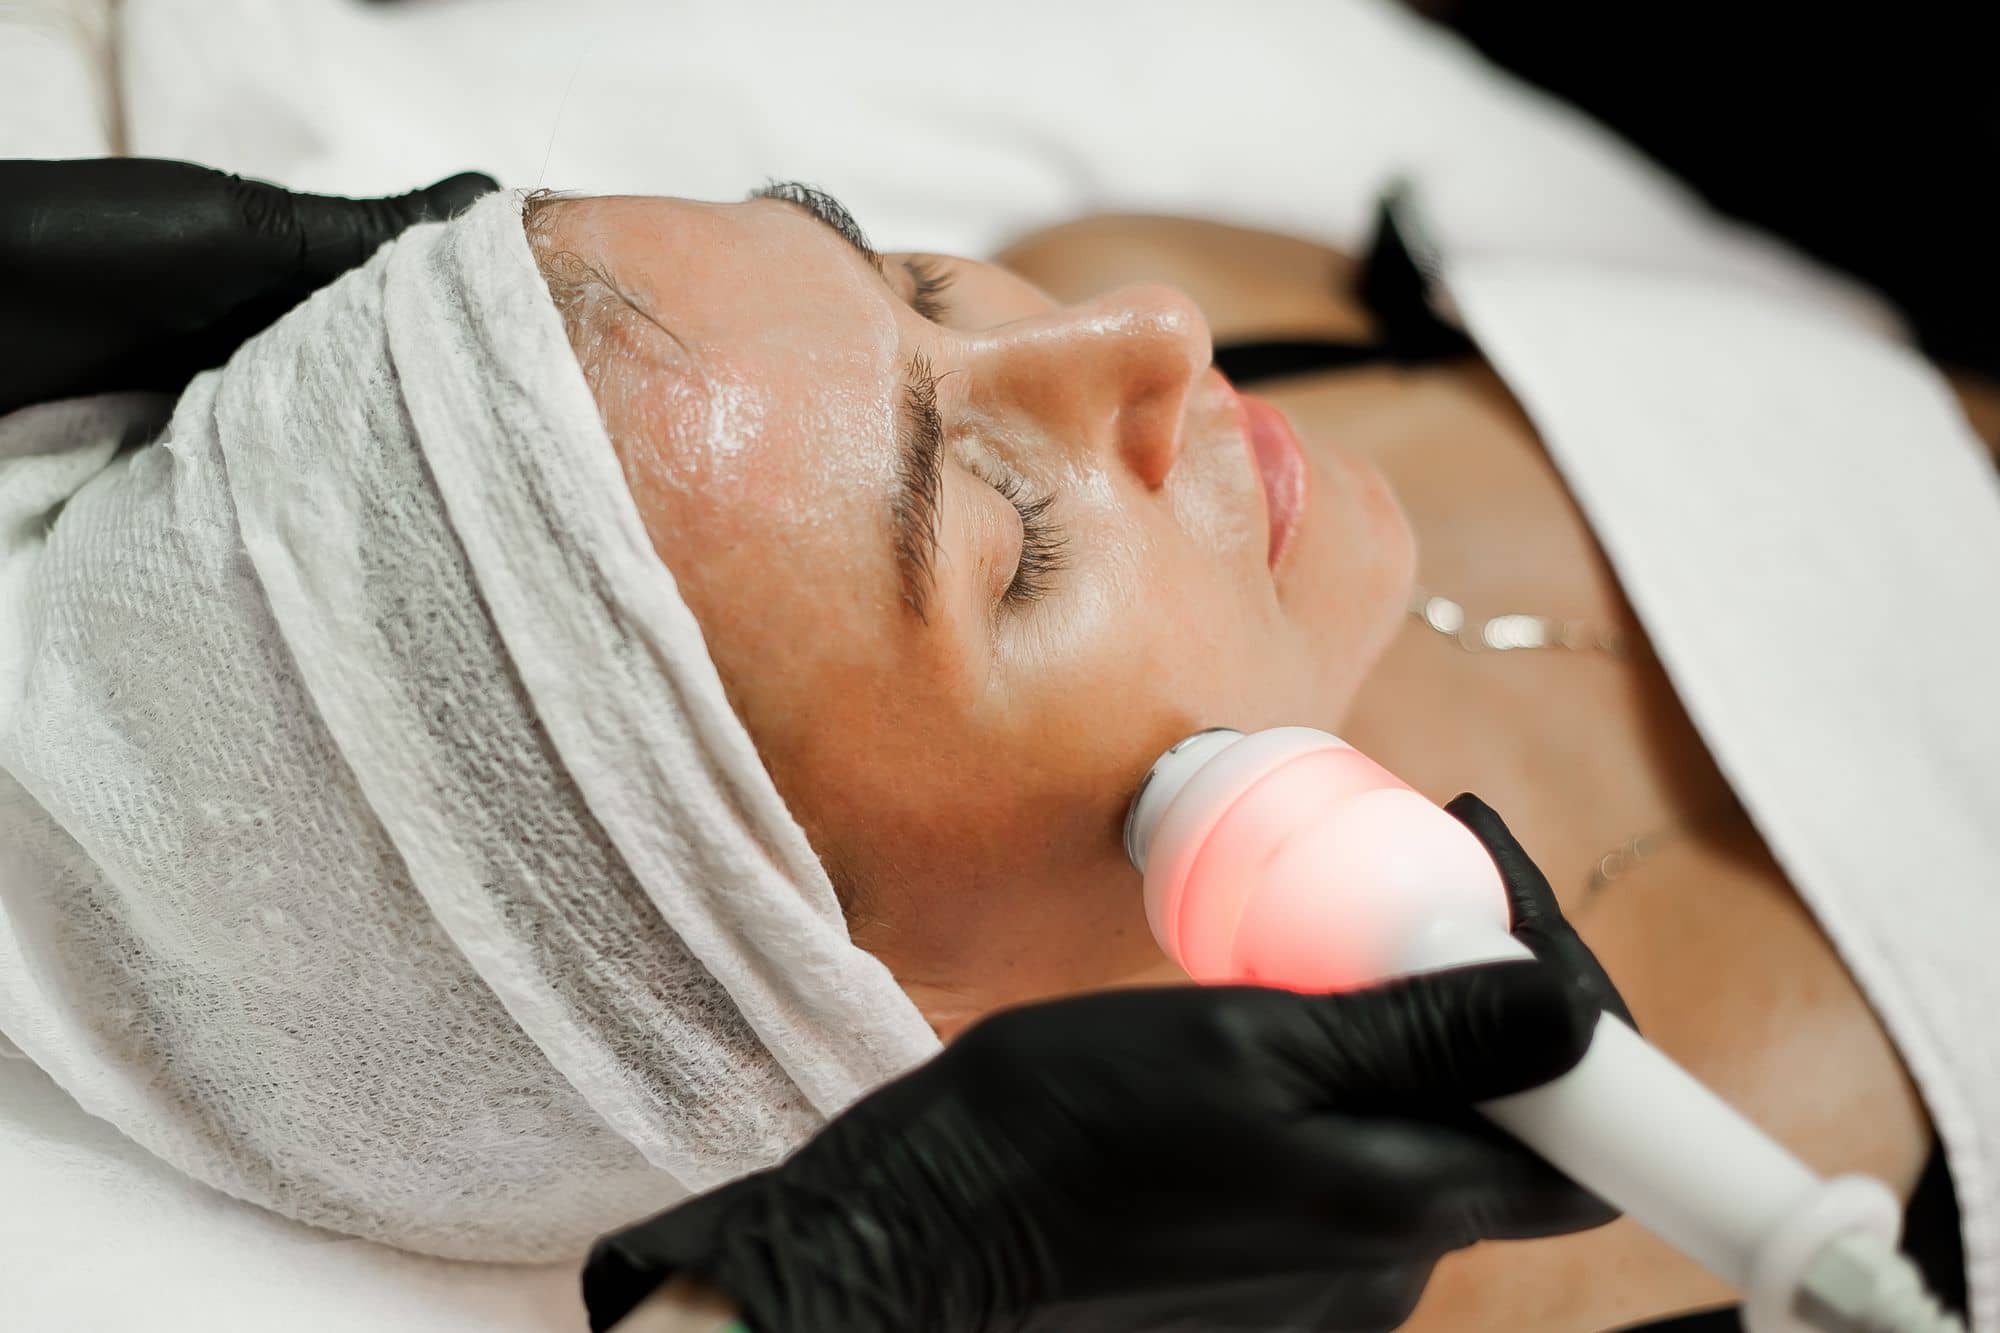 RF-lifting of face, neck and décolleté using Overline equipment at Esteticare